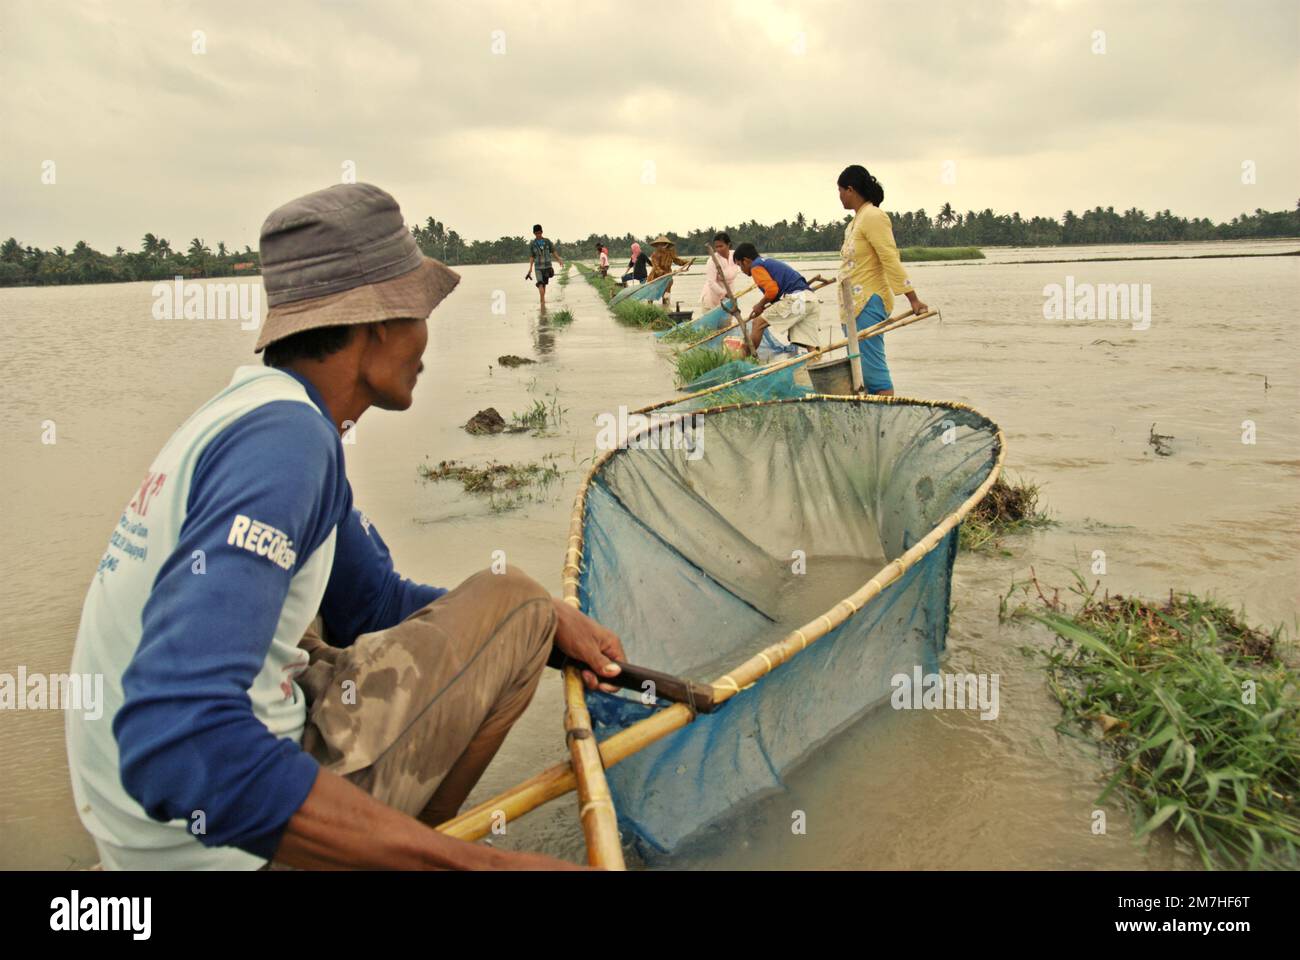 People fishing on a flooded rice field with pushnets during rainy season which causing floods in Karawang regency, West Java province, Indonesia. Stock Photo